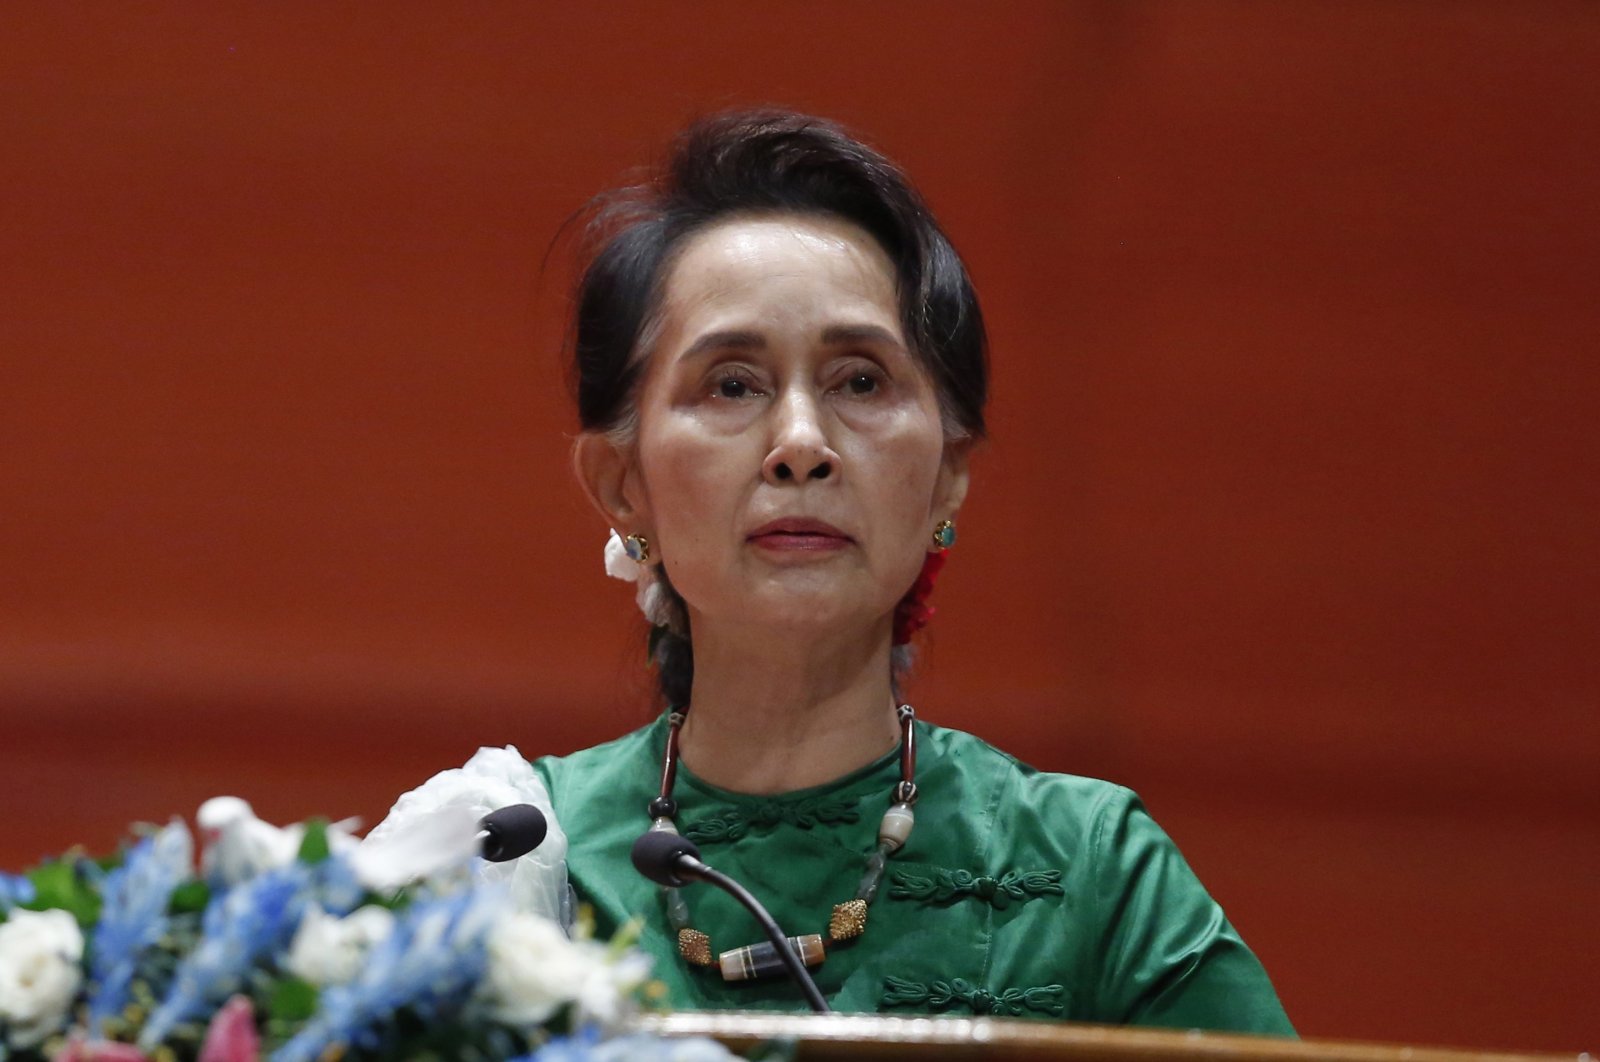 Aung San Suu Kyi speaks during the closing ceremony of the third session of the &quot;Union Peace Conference – 21st century Panglong,&quot;  Naypyitaw, Myanmar, July 16, 2018. (EPA Photo)